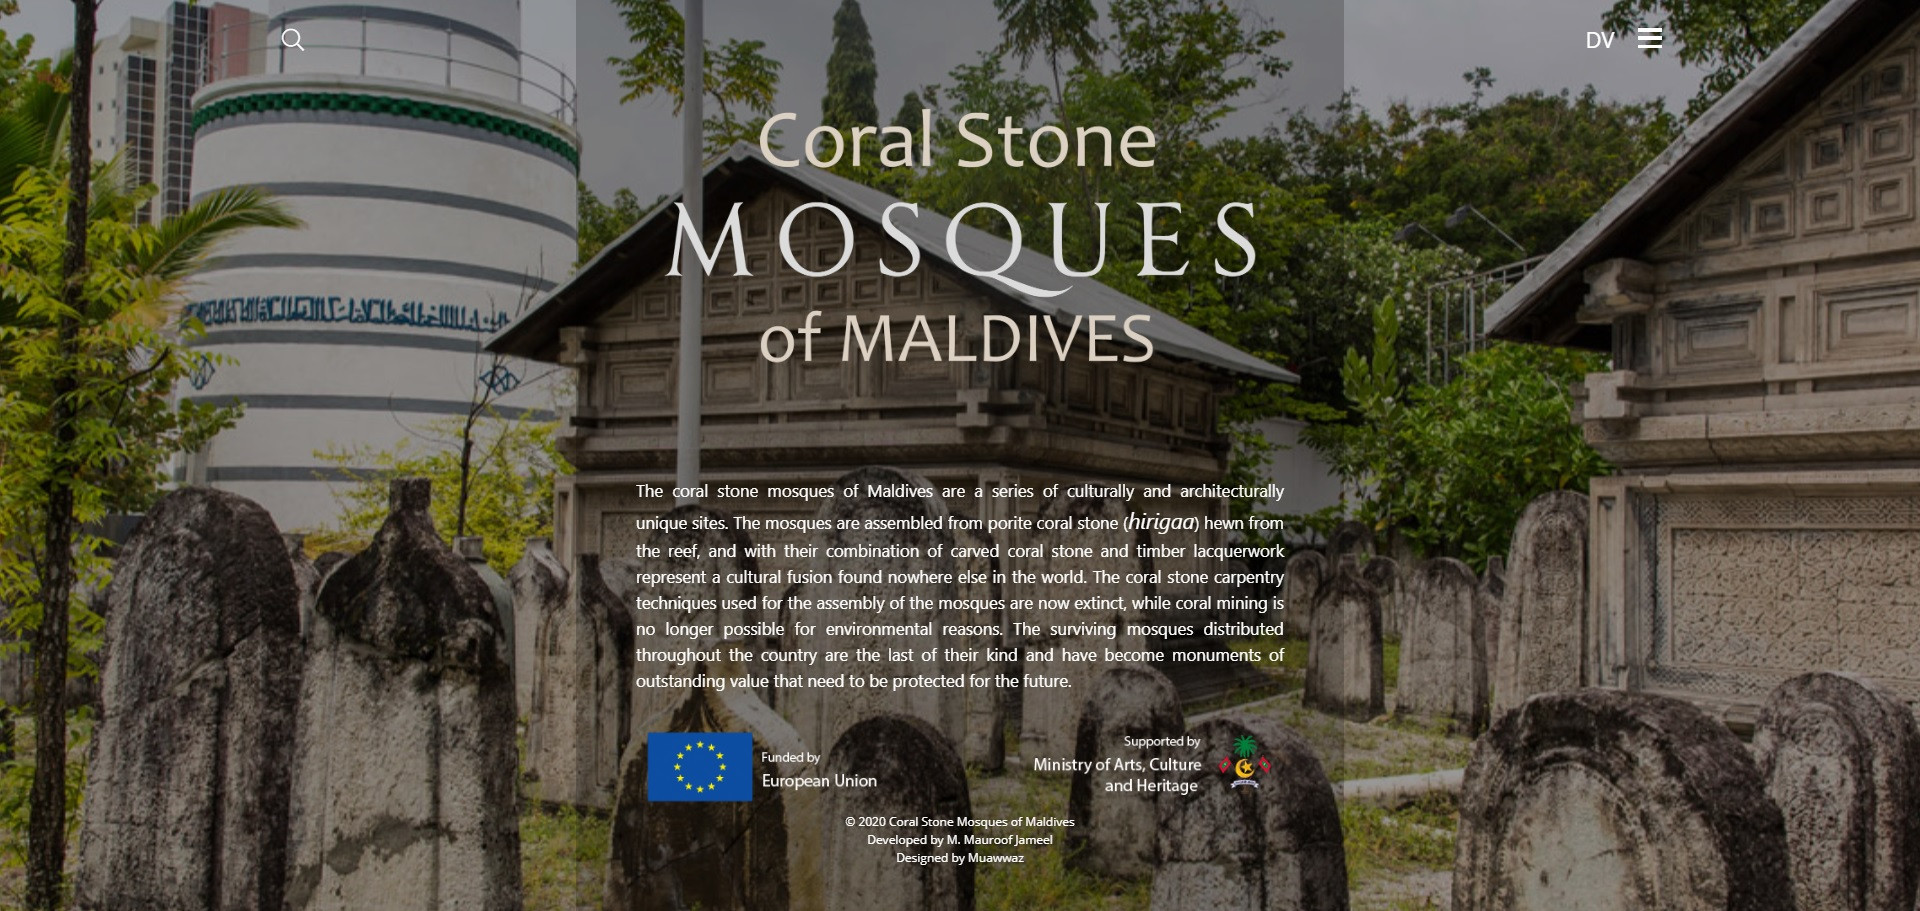 Launching Coral Stone Mosques of Maldives Website